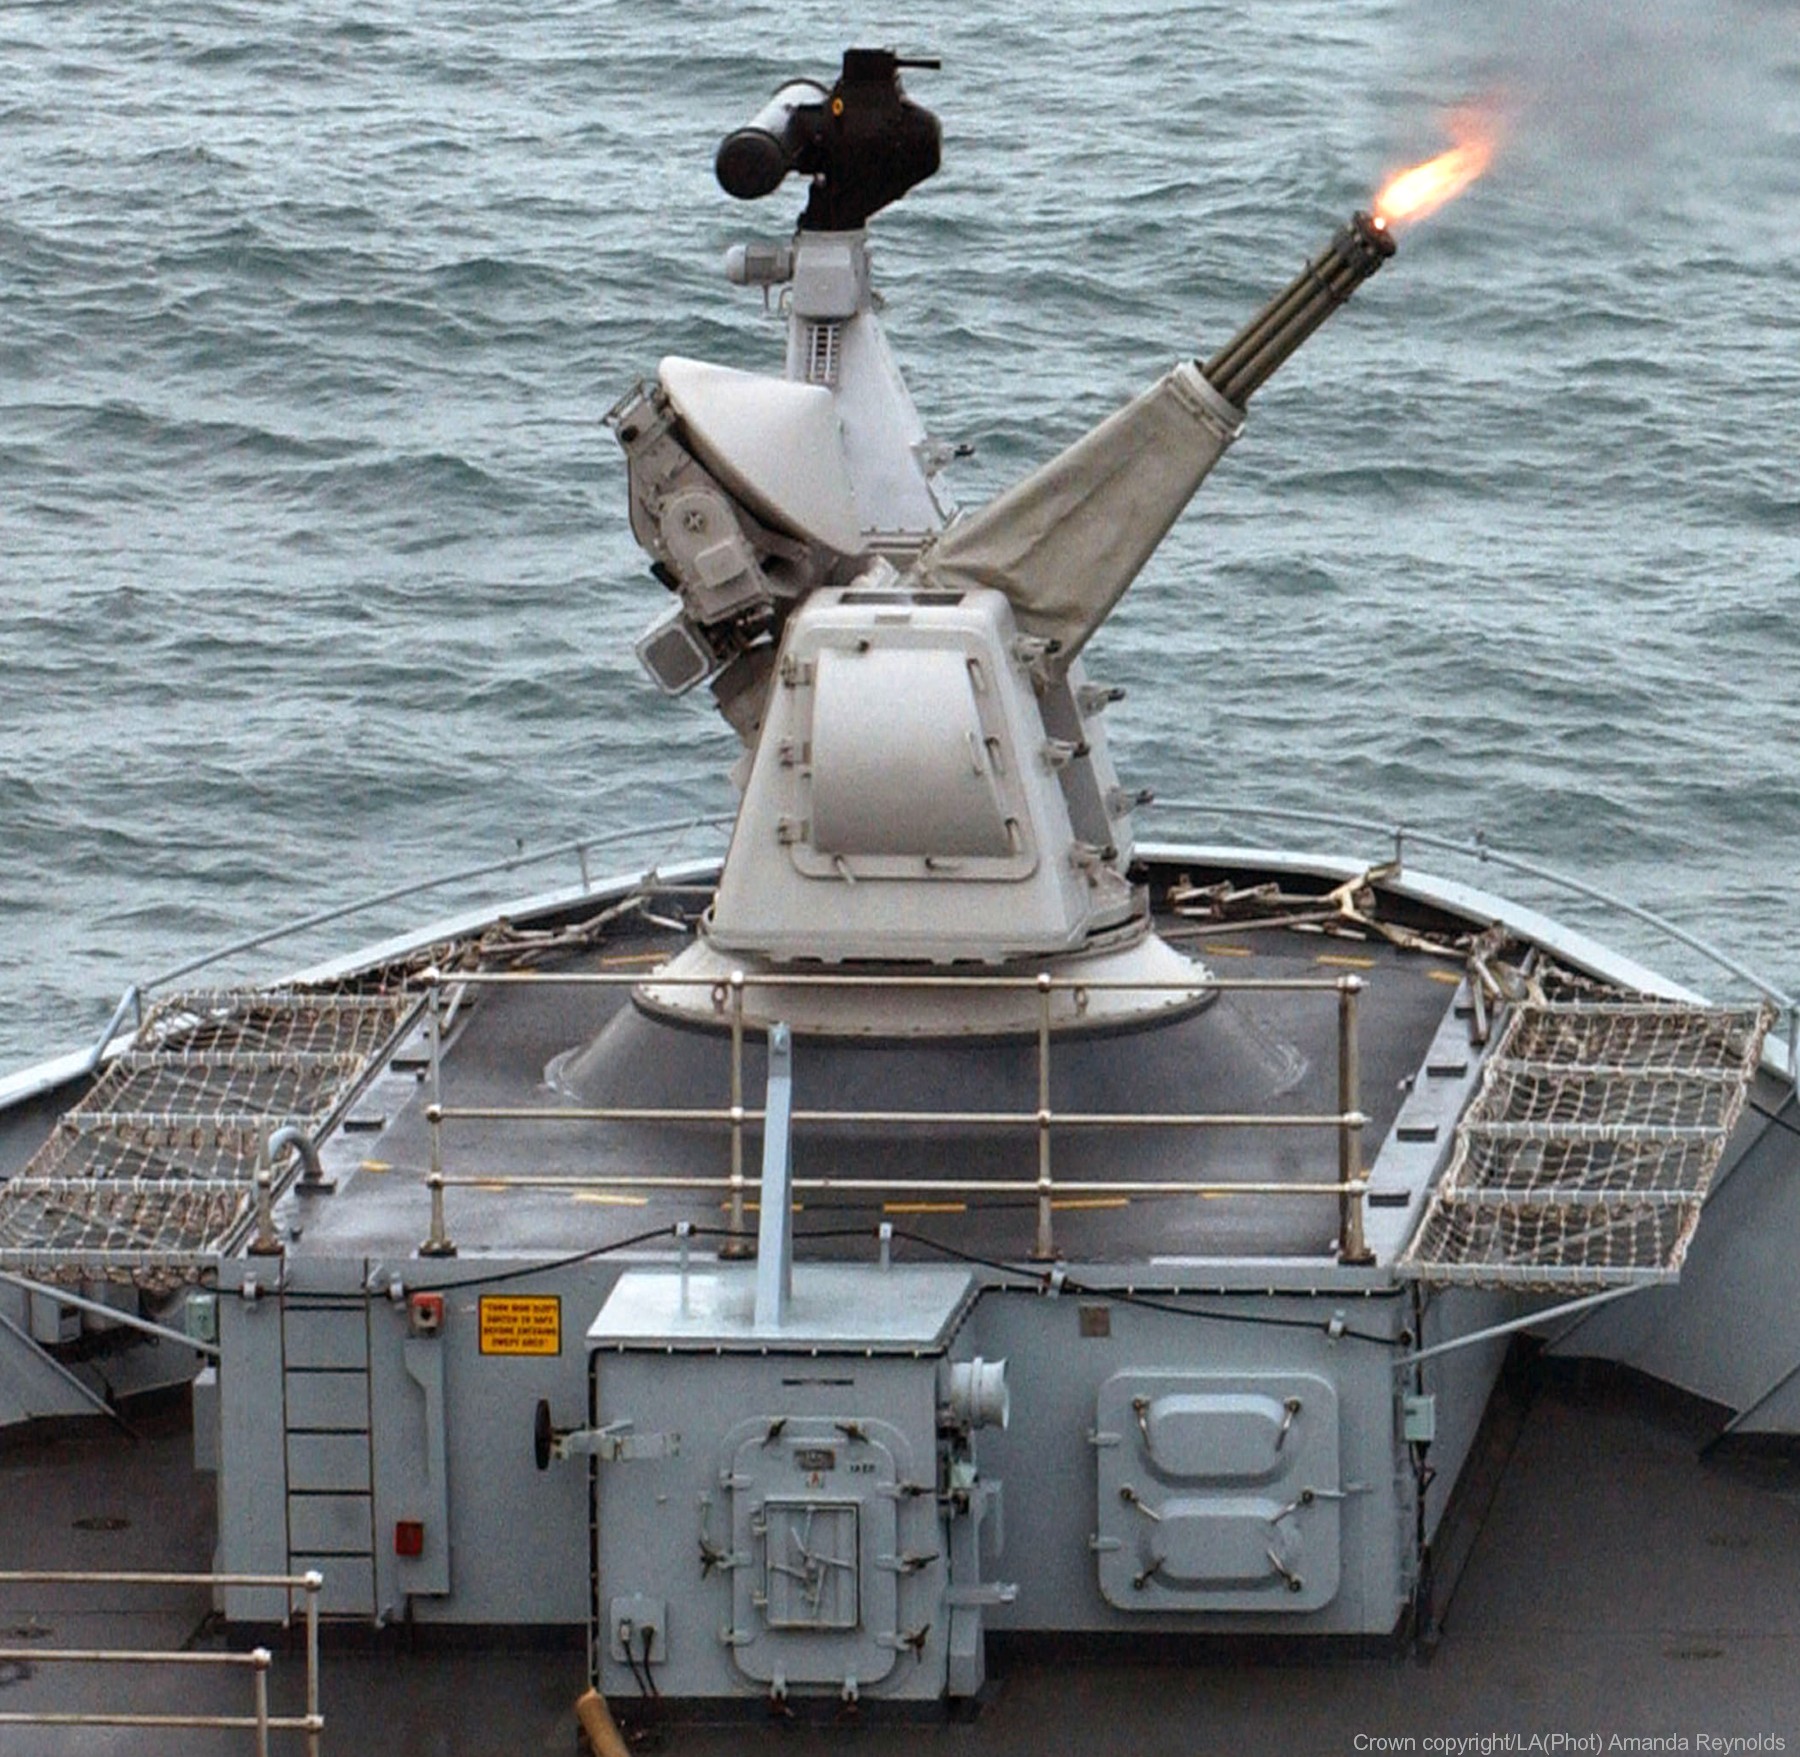 goalkeeper close-in weapon system ciws 30mm thales navy 03